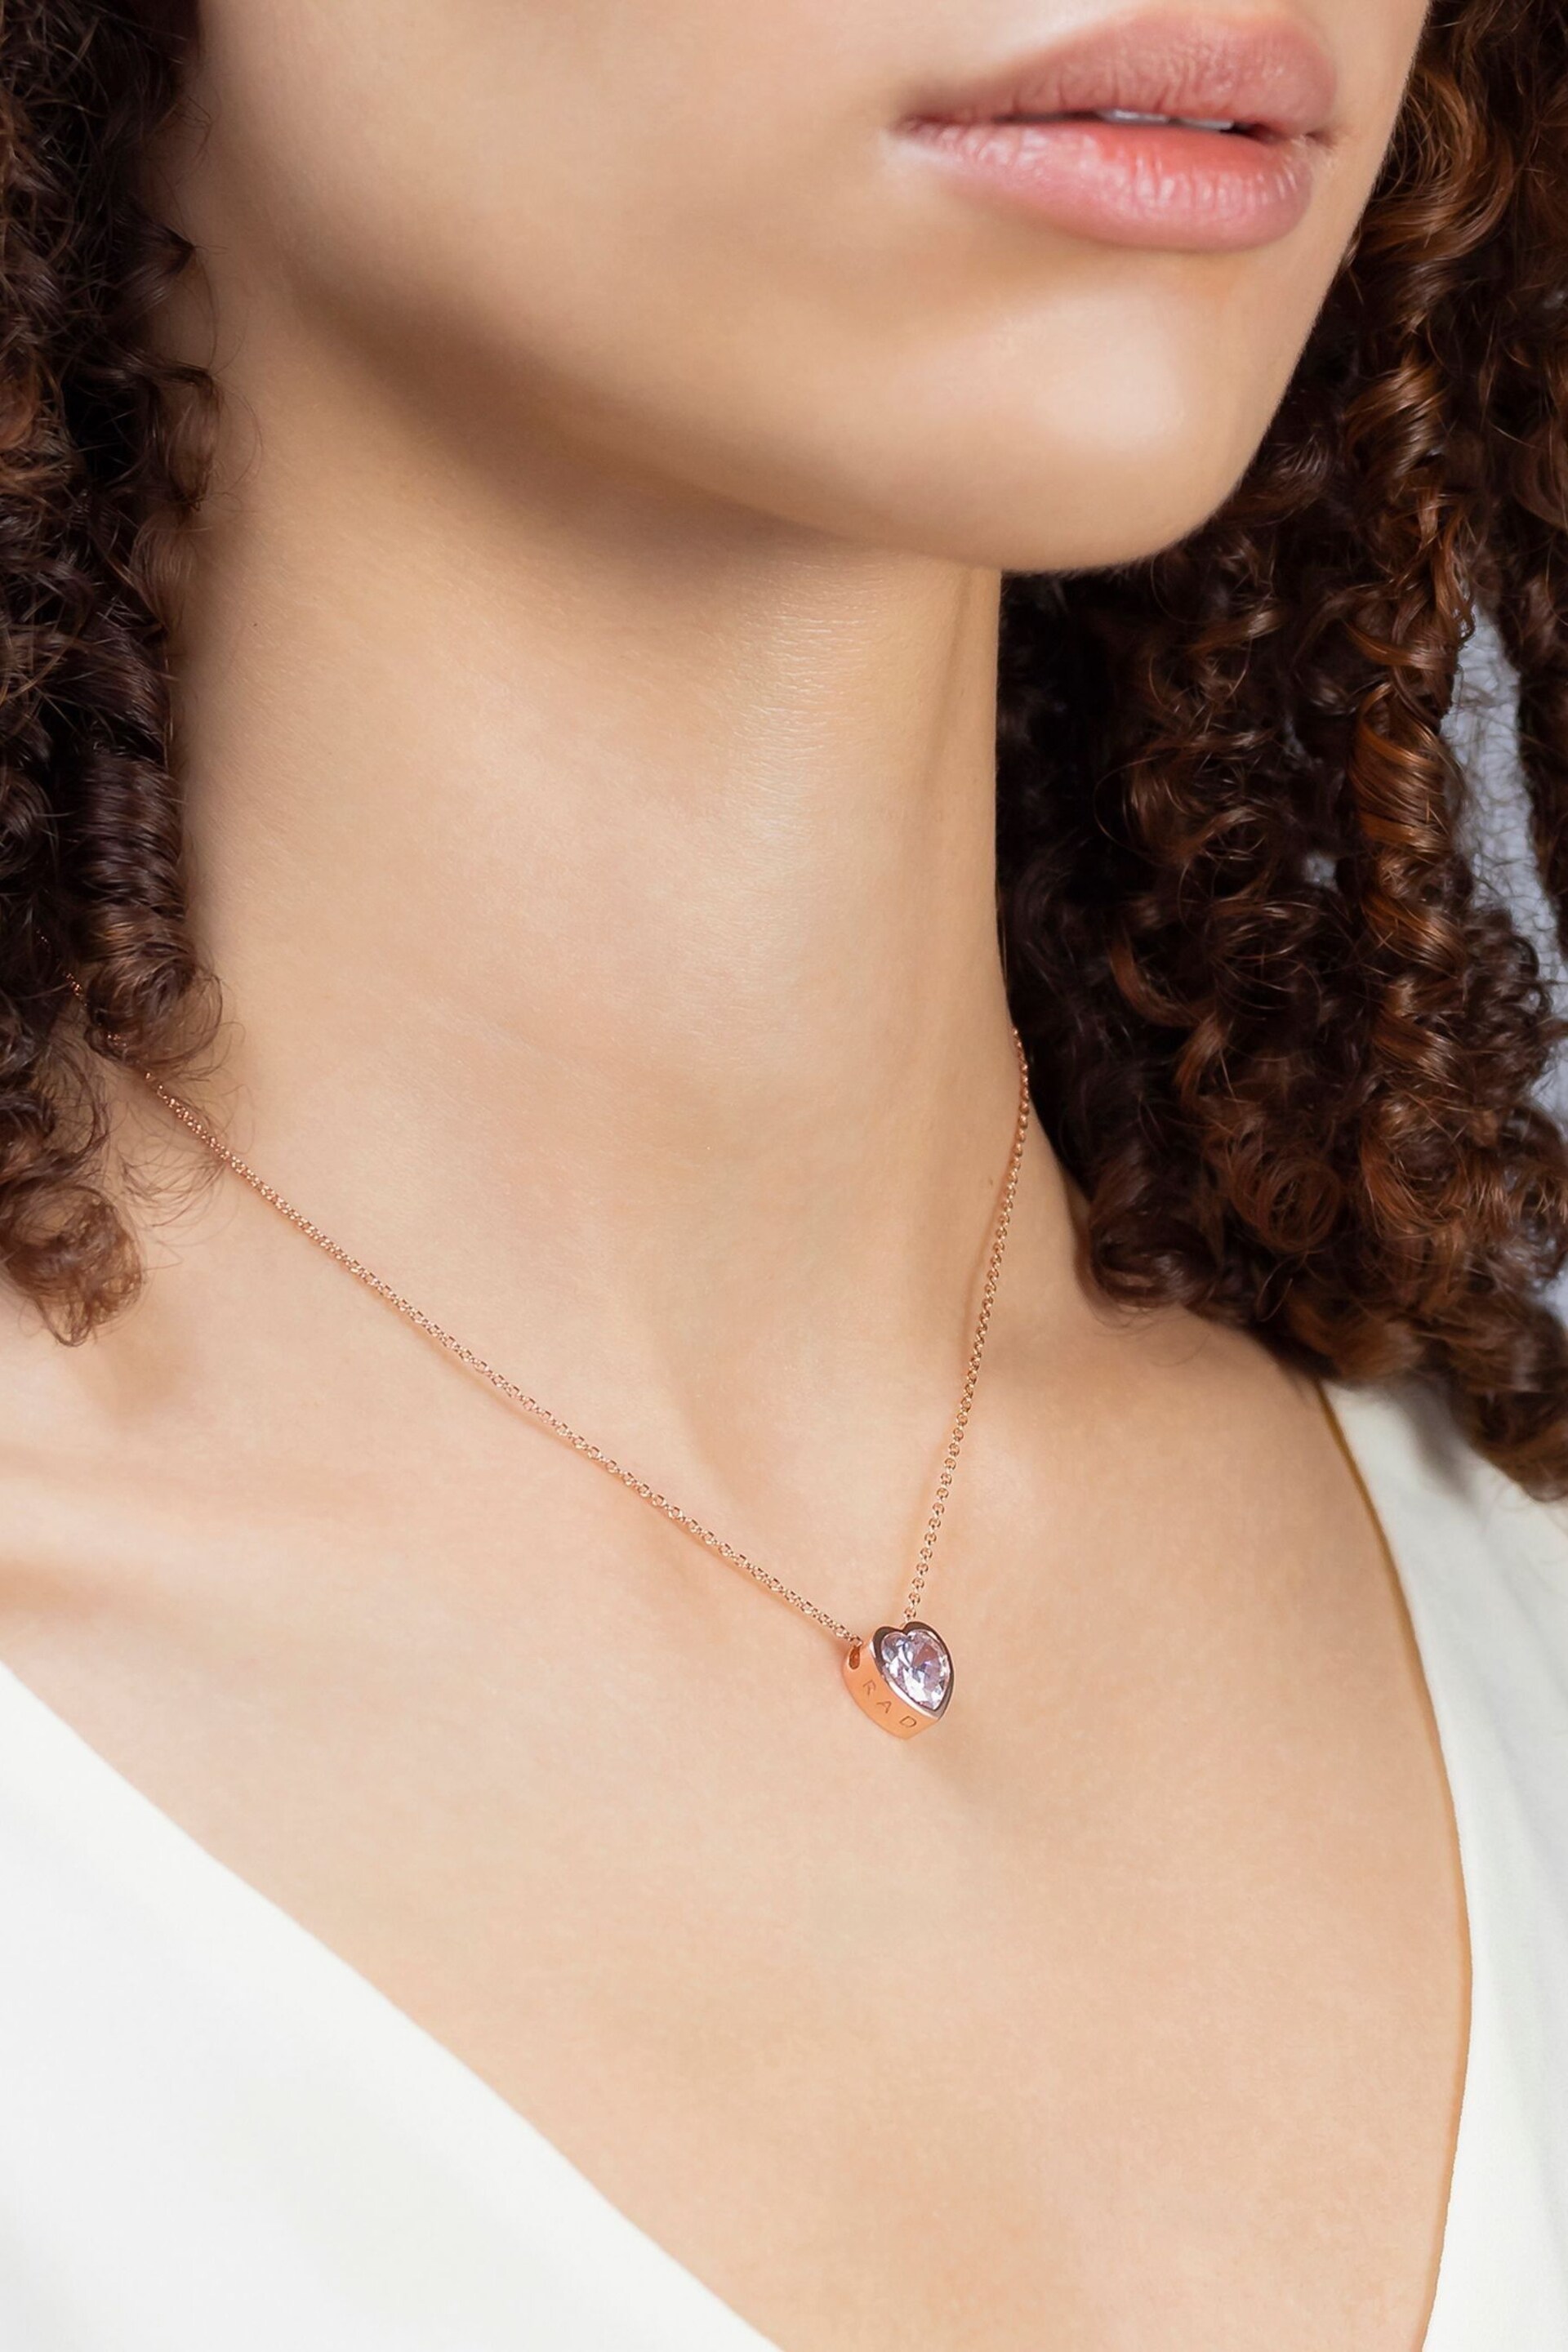 Radley Ladies Love 18ct Rose Gold Tone Sterling Silver Clear Stone Heart Necklace - Image 1 of 6